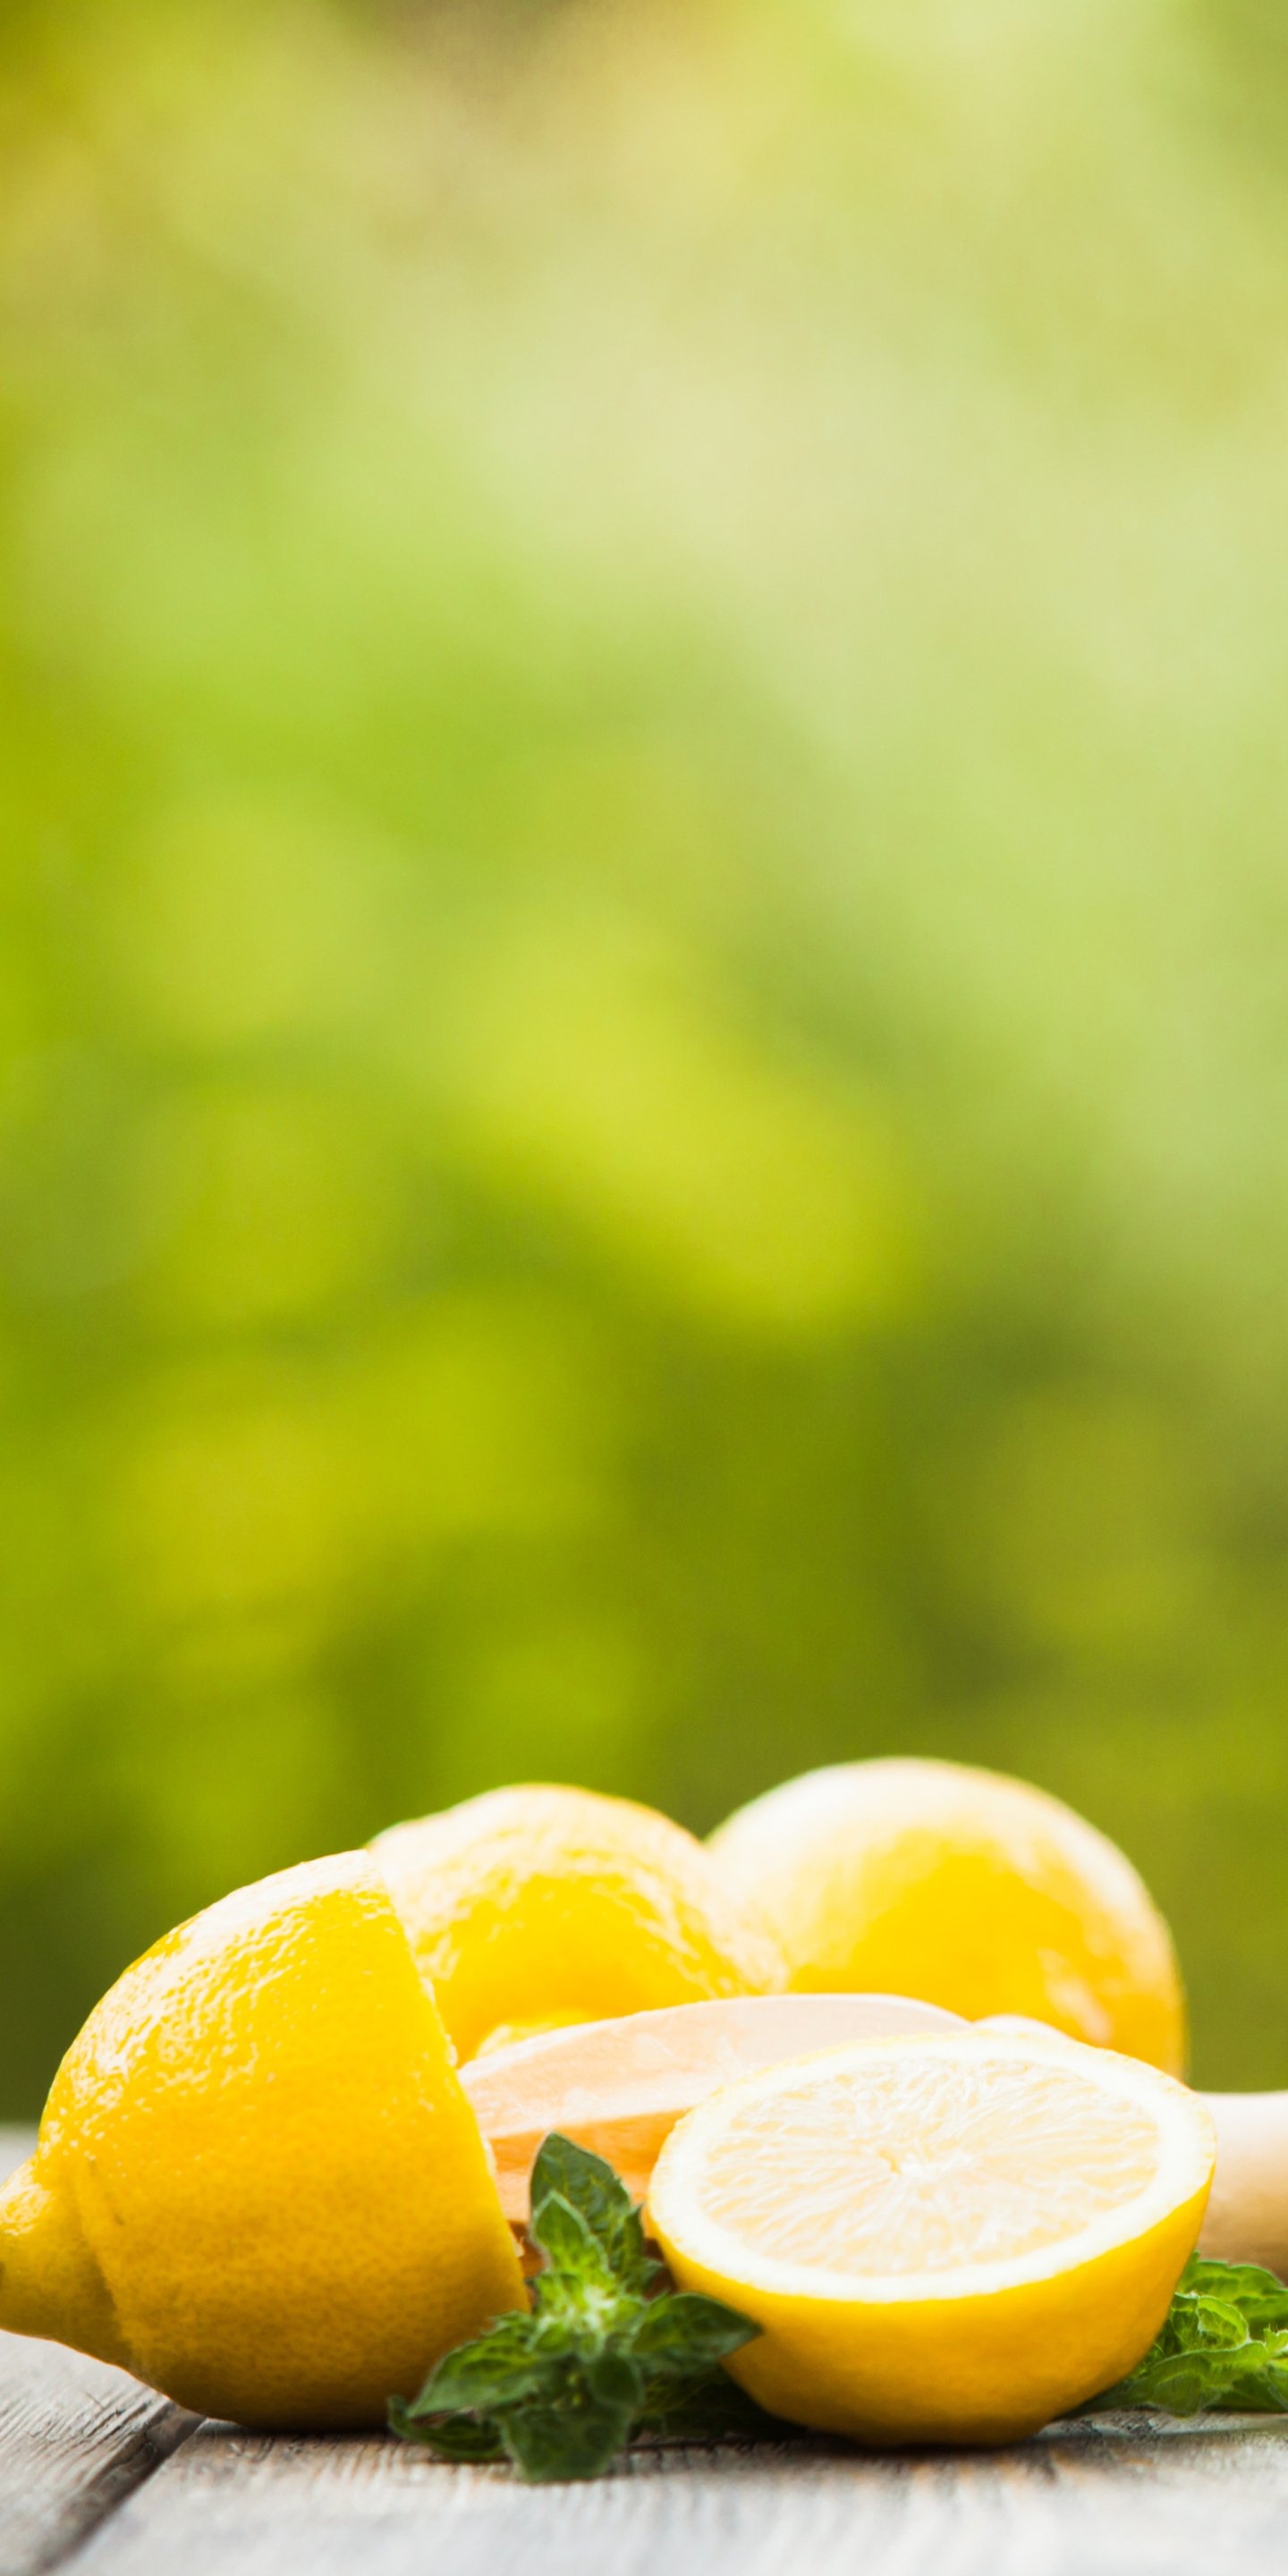 Lemon: Contain numerous phytochemicals, including polyphenols, terpenes, and tannins. 1440x2880 HD Background.